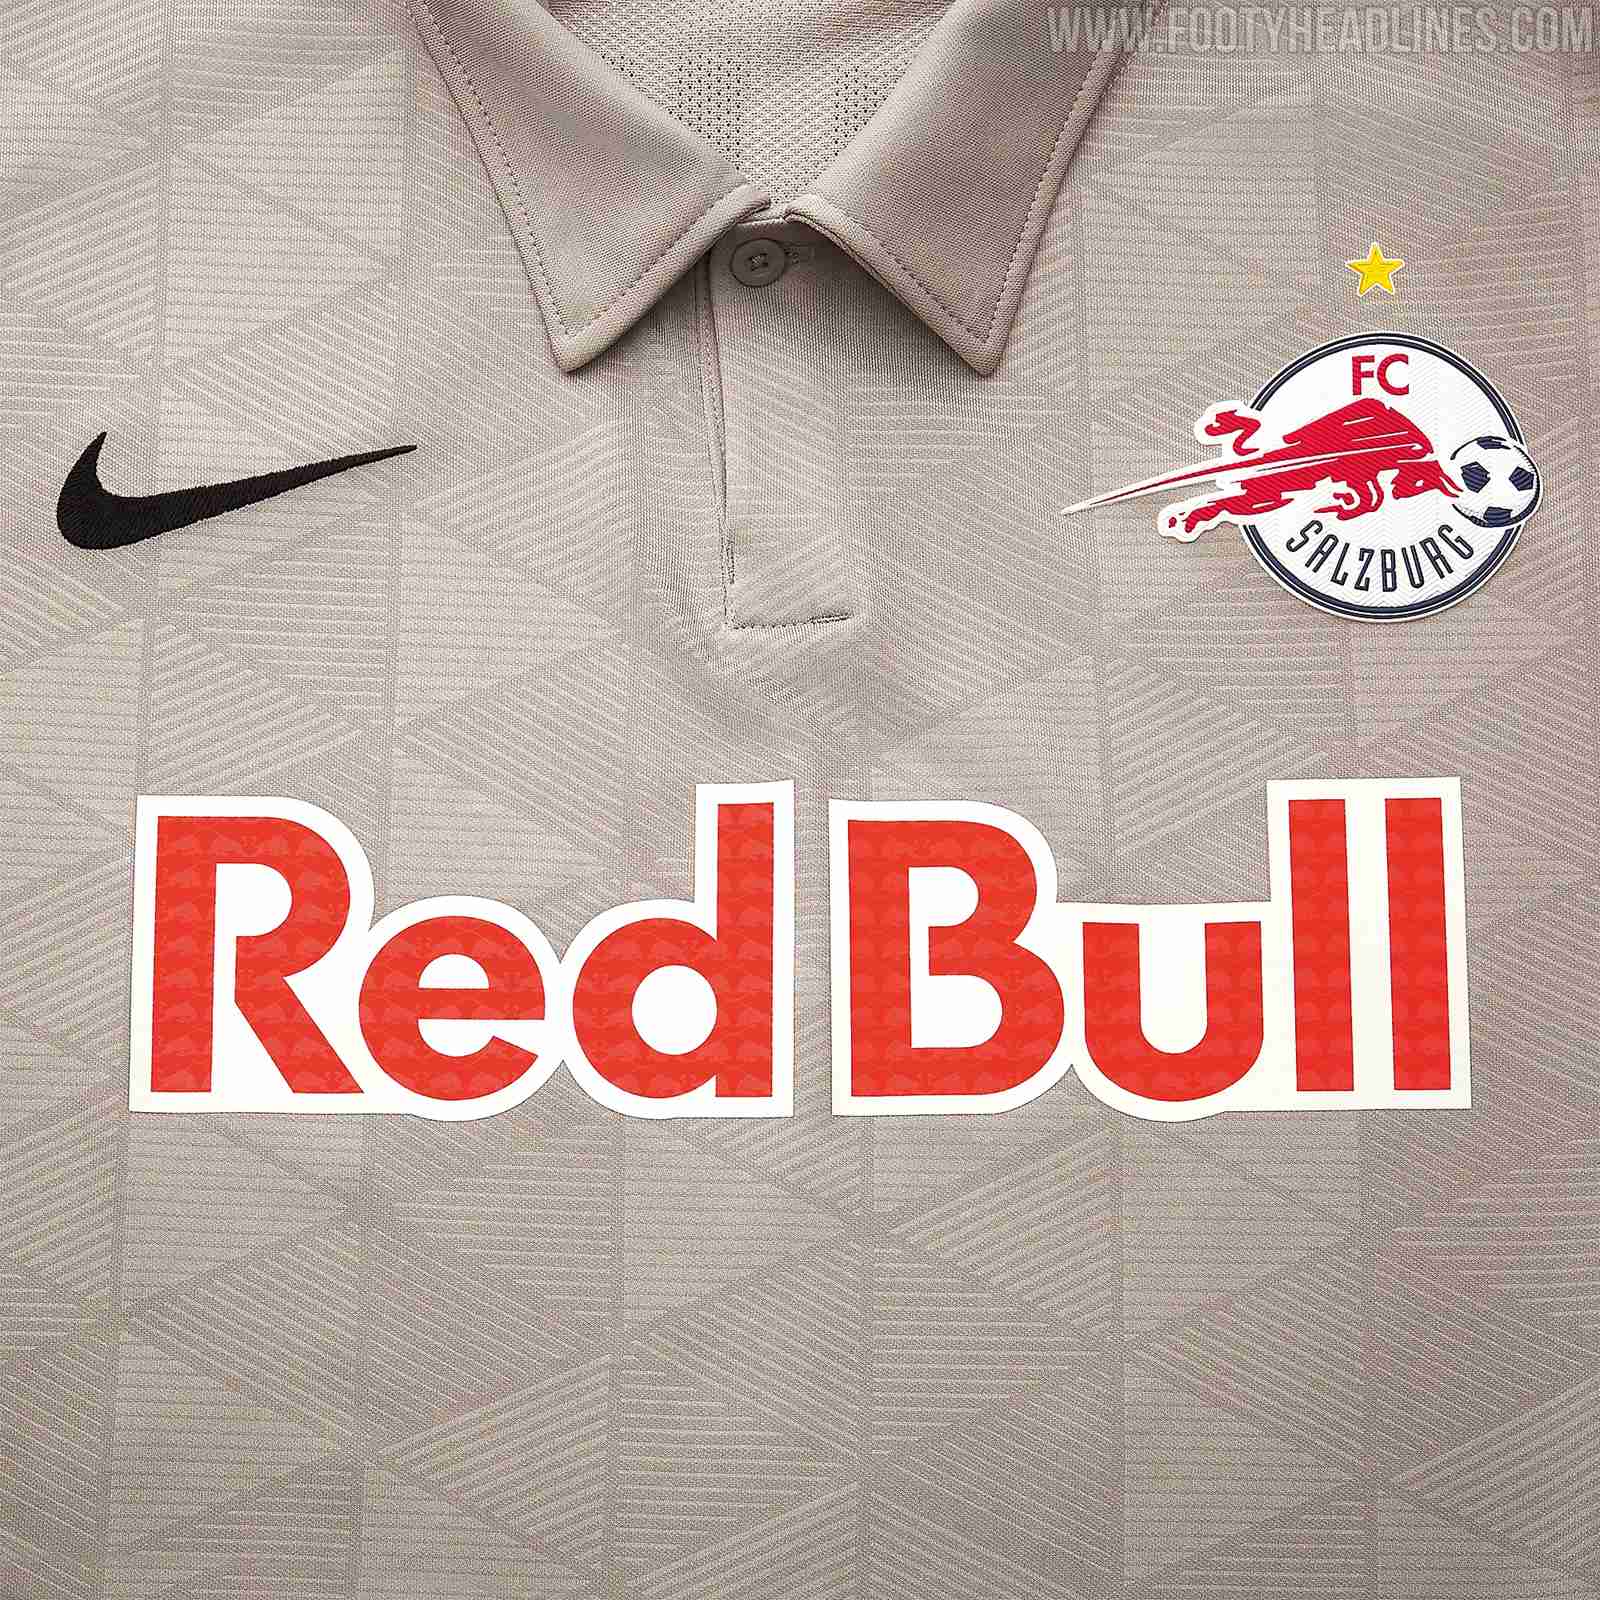 Red Bull Salzburg 21-22 Champions League Kit Released - Footy Headlines